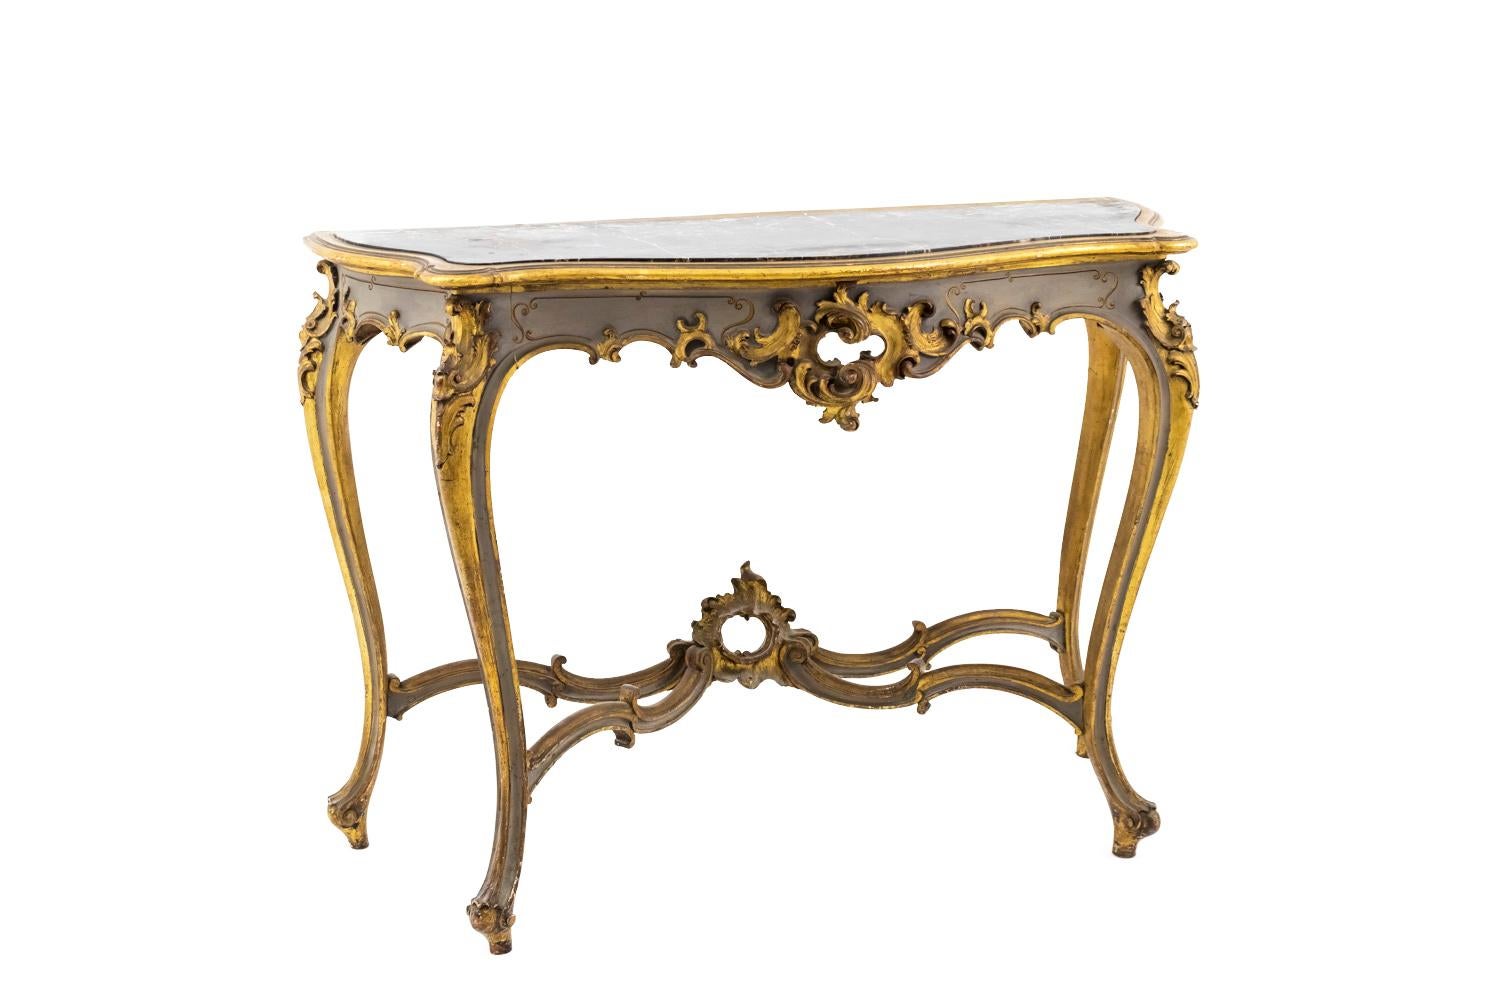 Louis XV style console in grey lacquered and giltwood standing on four cabriole legs finished by scrolls and linked each other by a curved stretcher composed by scrolls with an openwork rocaille central motif.
Scalloped apron with an acanthus